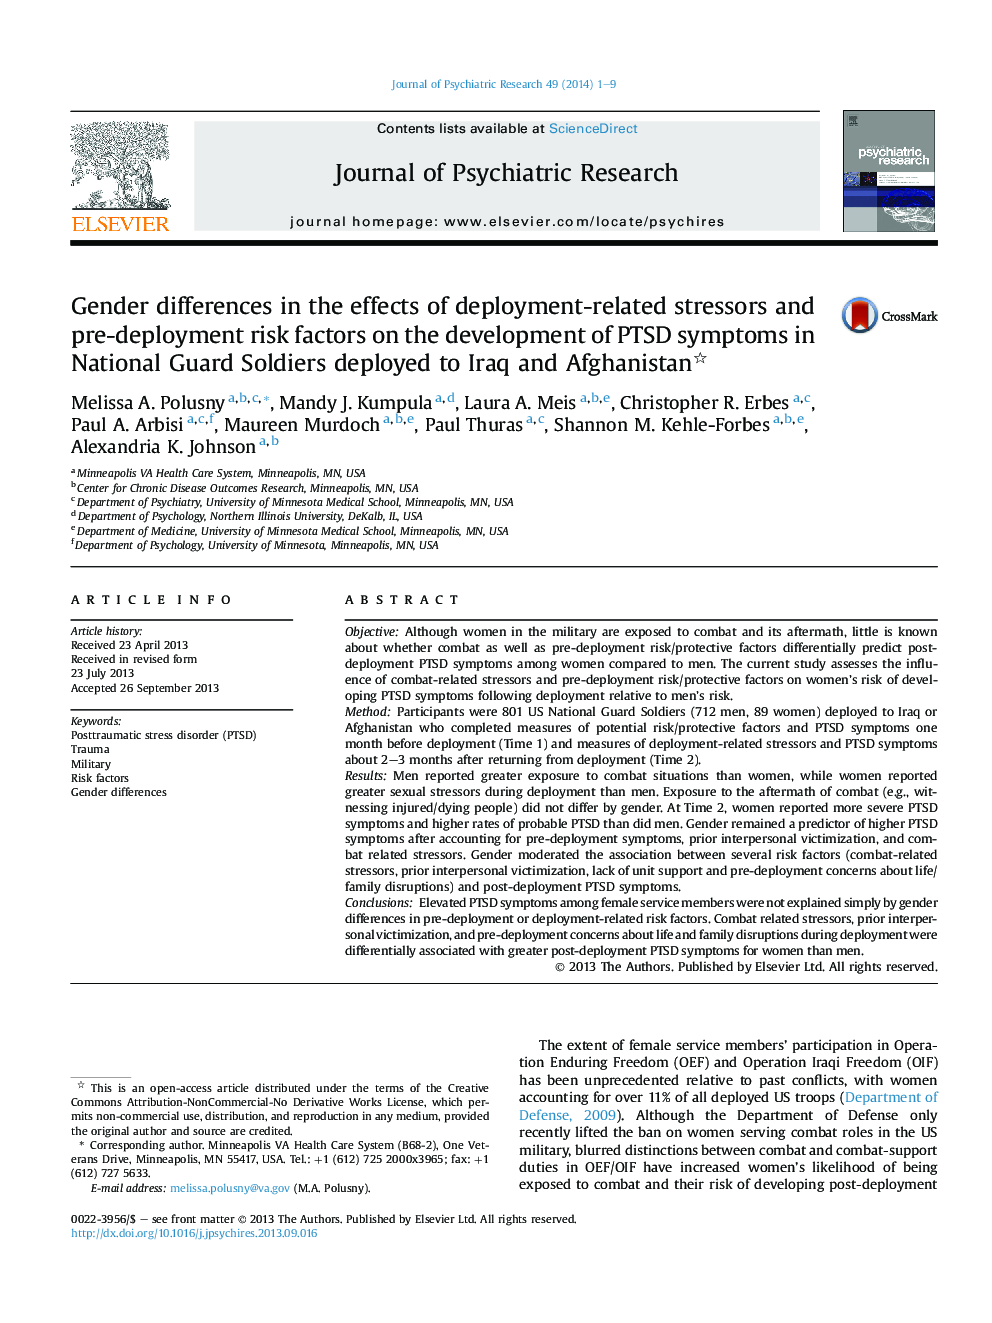 Gender differences in the effects of deployment-related stressors and pre-deployment risk factors on the development of PTSD symptoms in National Guard Soldiers deployed to Iraq and Afghanistan